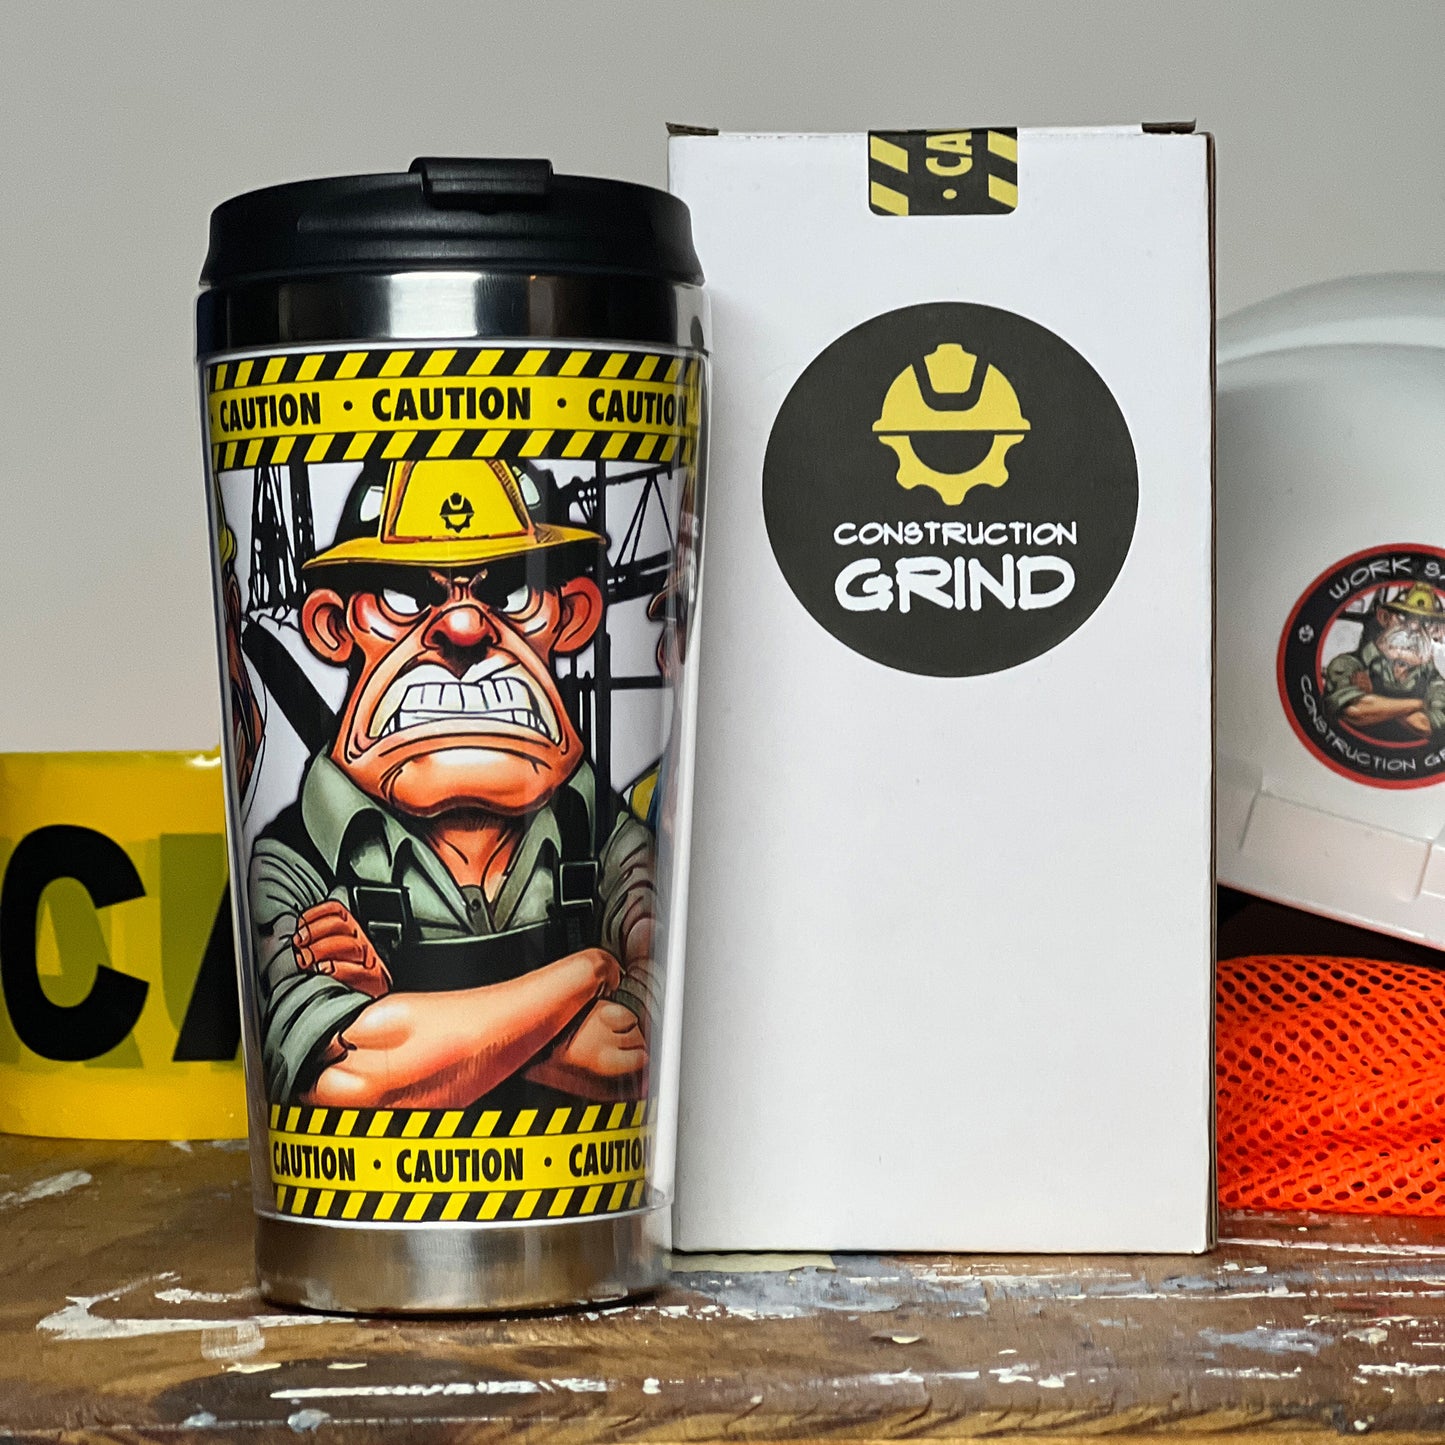 The "Meet the Crew" First Shift 12 oz. coffee tumbler comes in a white gift box with the Construction Grind logo and a caution tape sticker box seal.